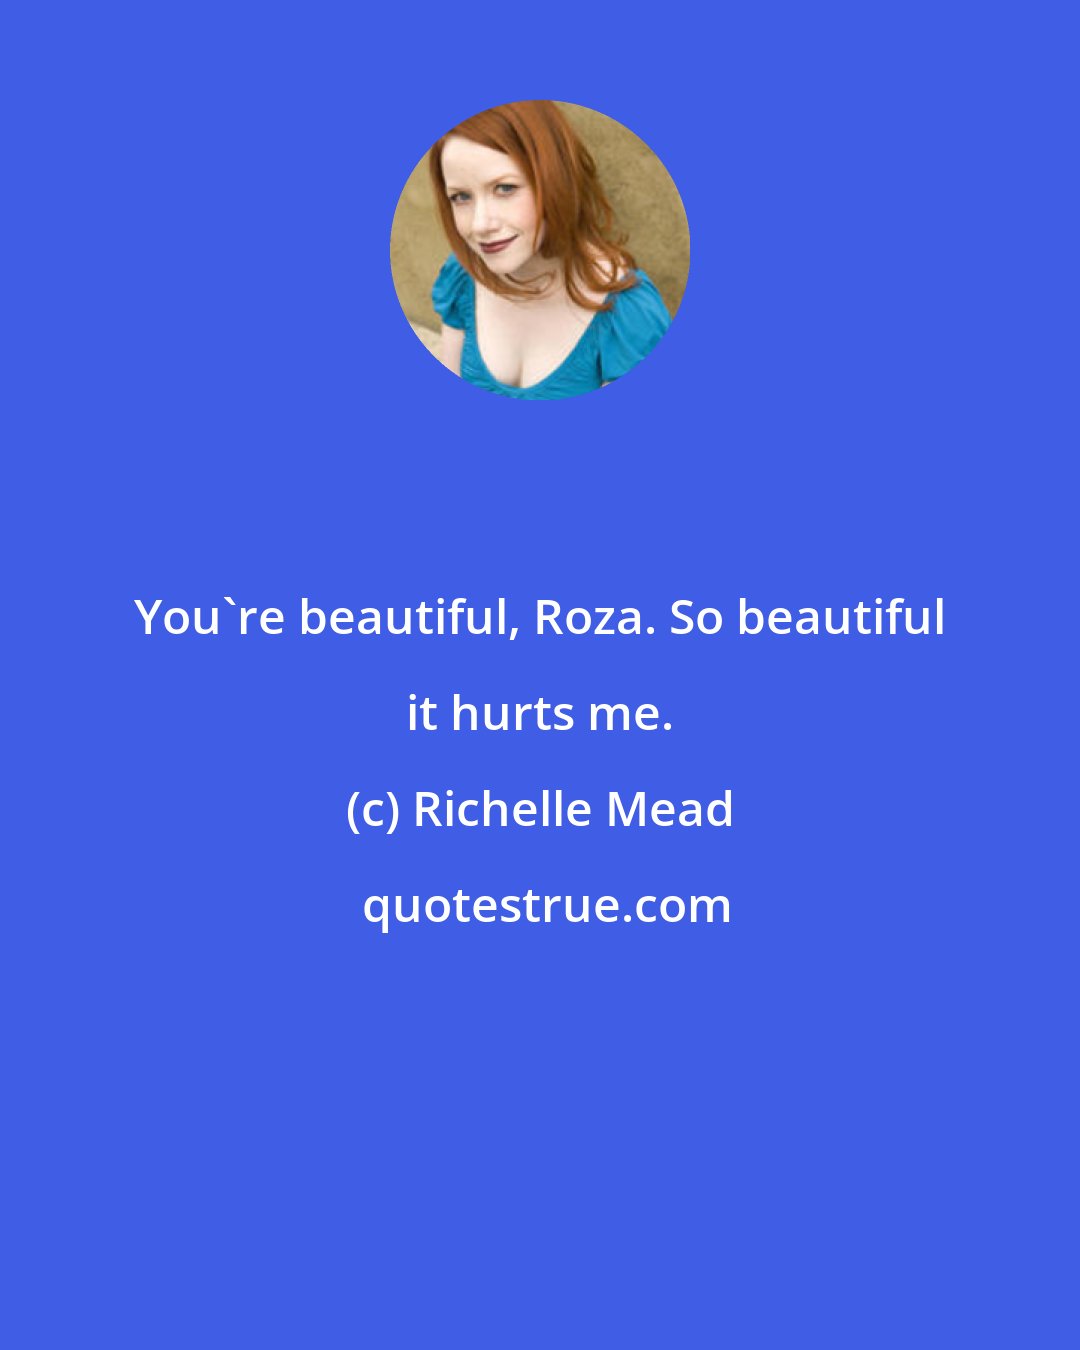 Richelle Mead: You're beautiful, Roza. So beautiful it hurts me.